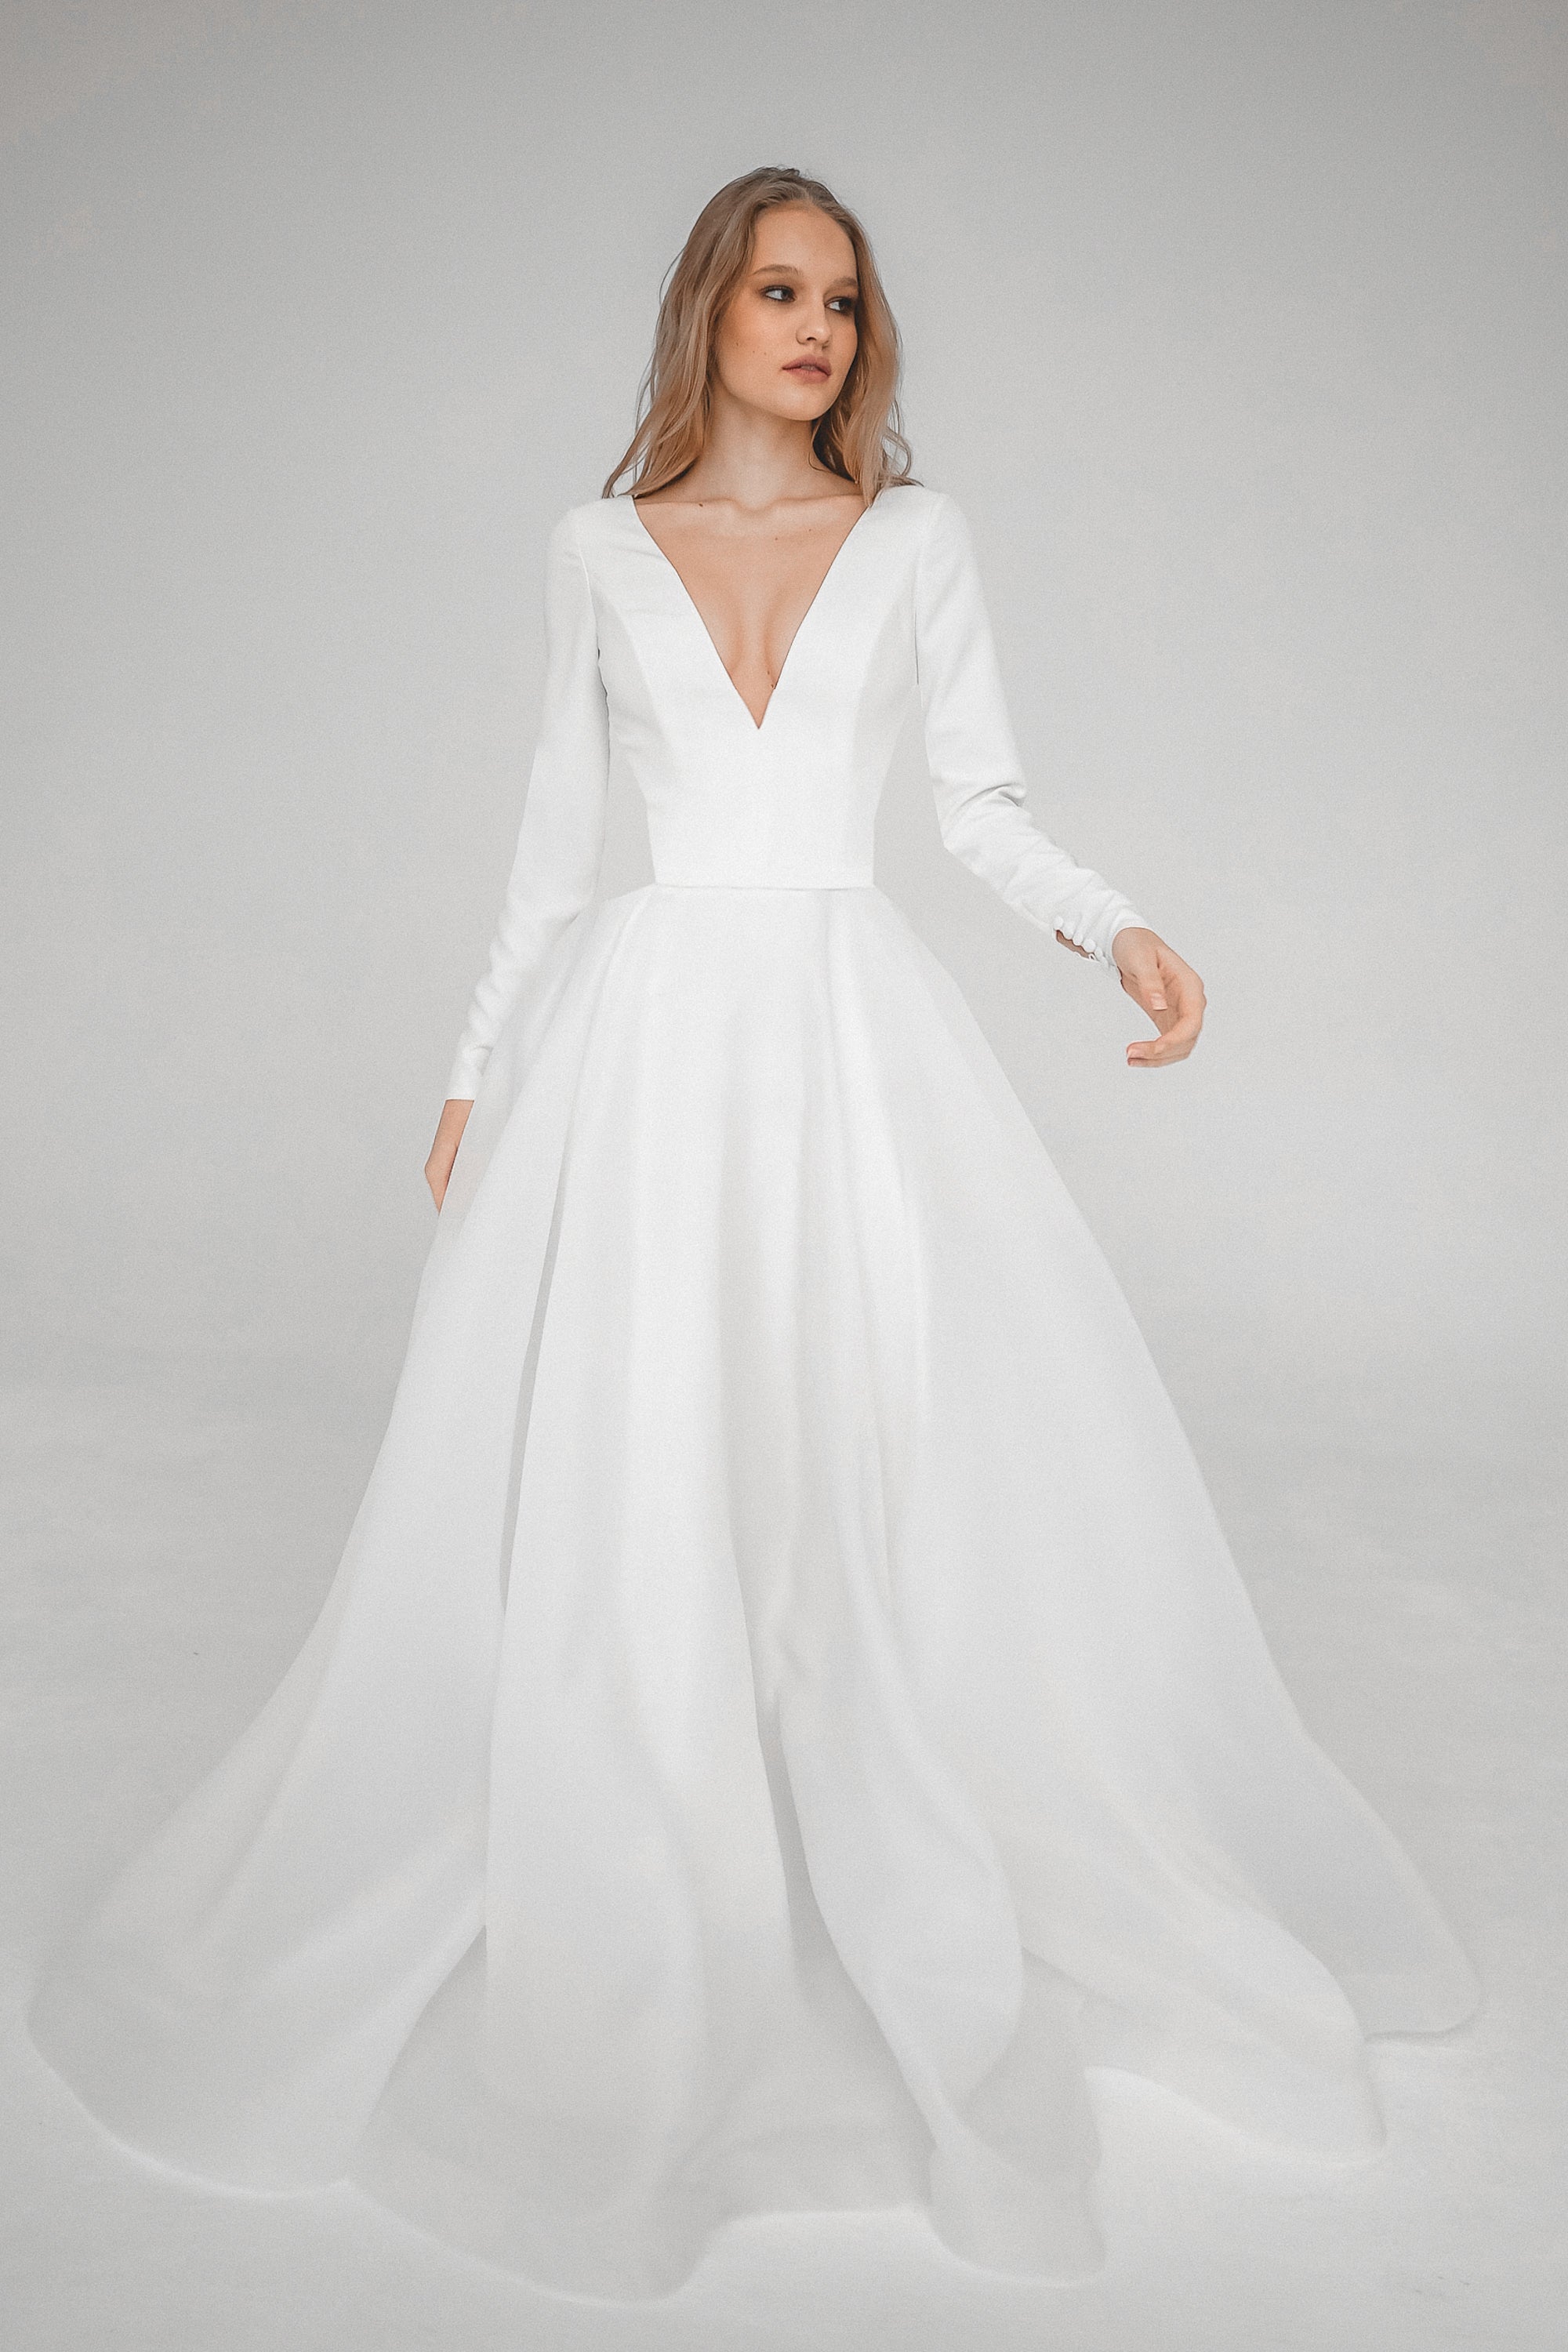 WEDDING DRESSES UNDER $1000 STYLE TBCOL283 - The Bridal Company